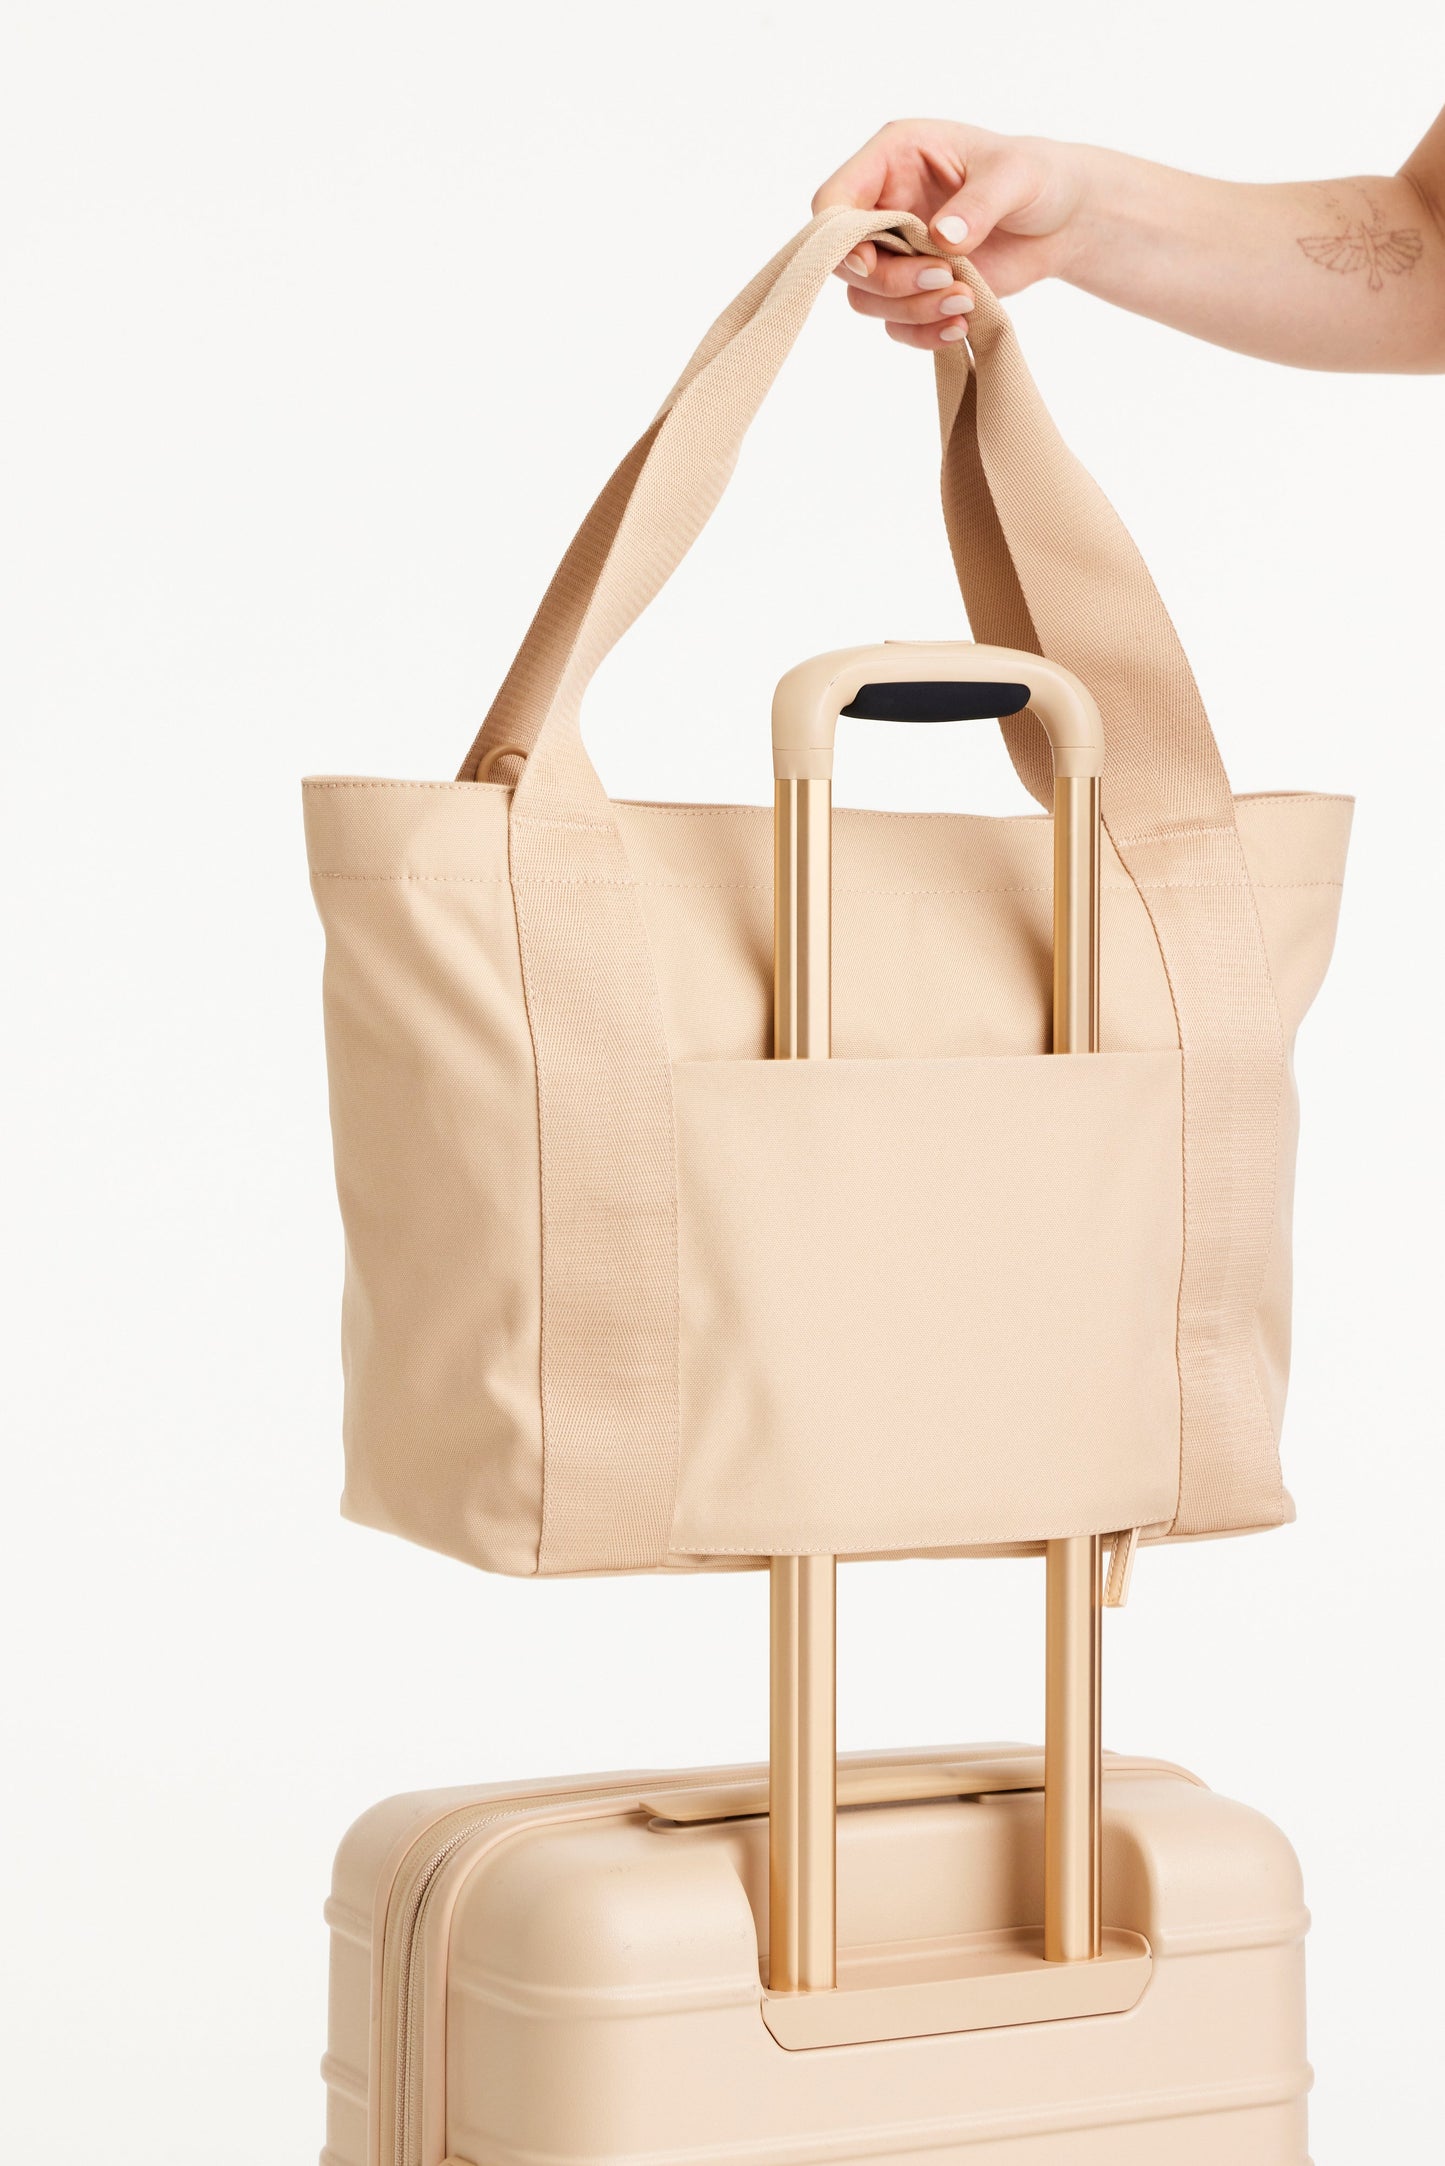 The BÉISics Tote in Beige